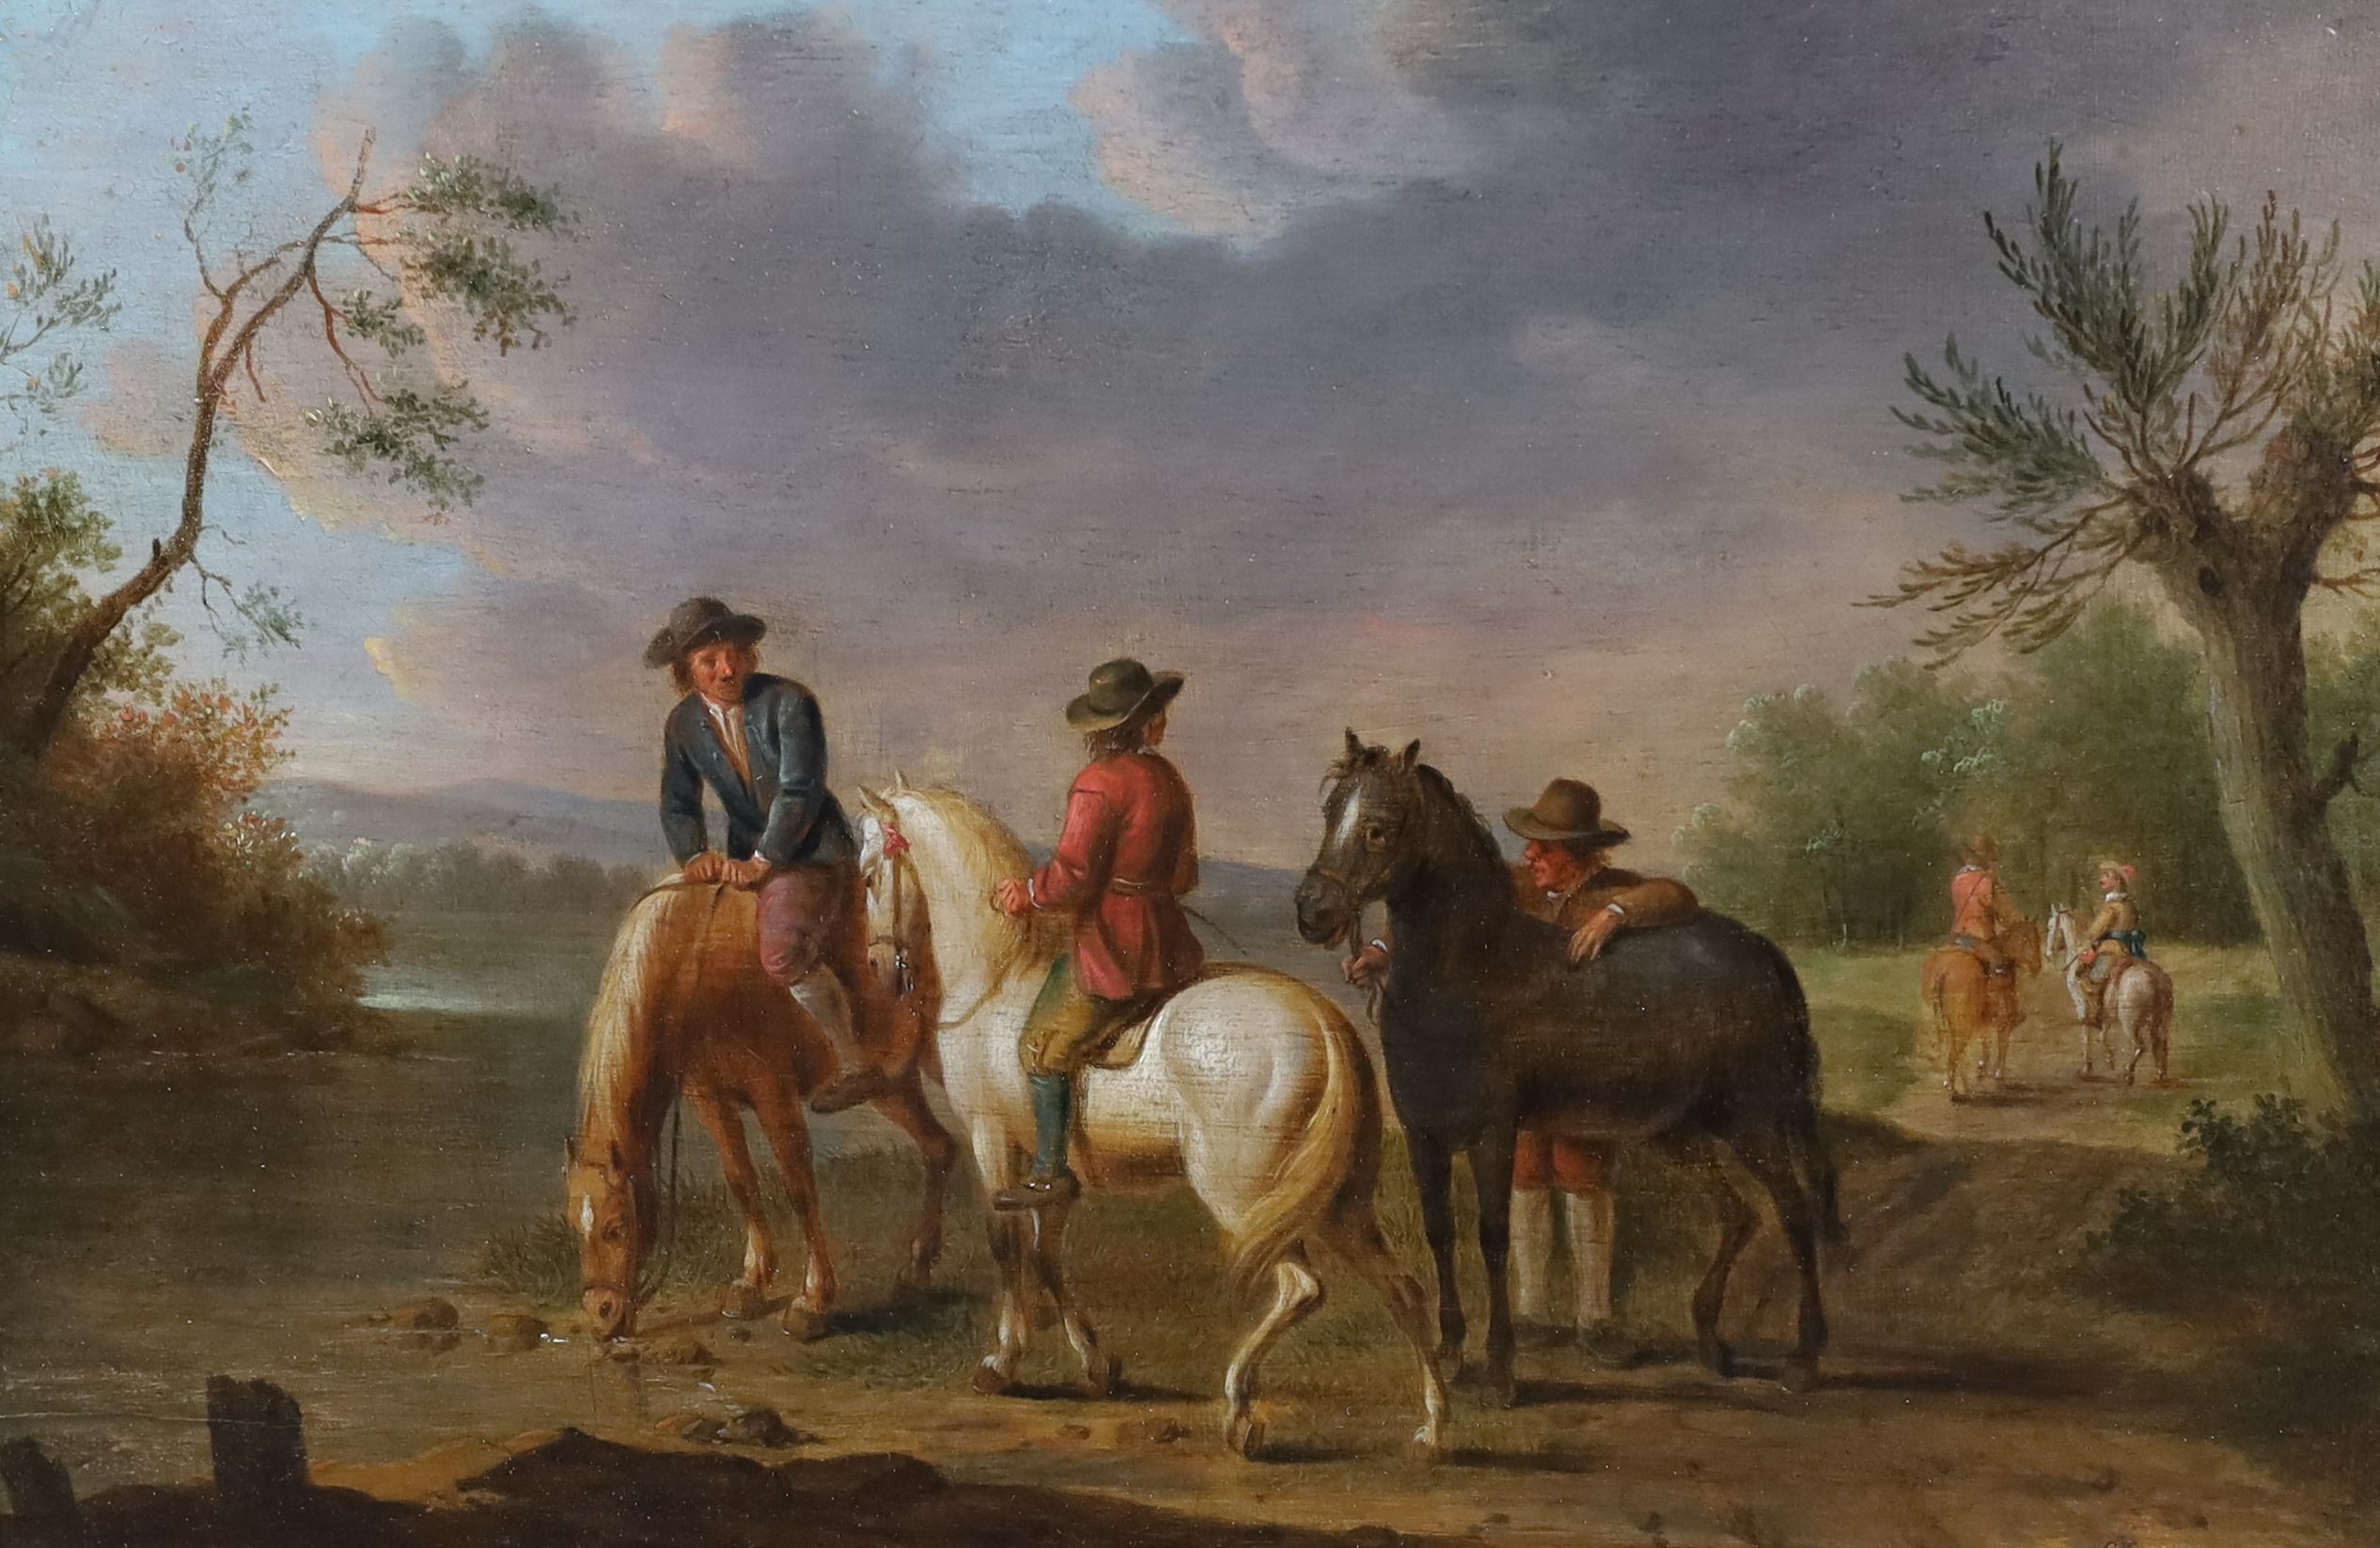 17th Century Flemish School, Horse riders in a landscape, oil on wooden panel, 24 x 36cm